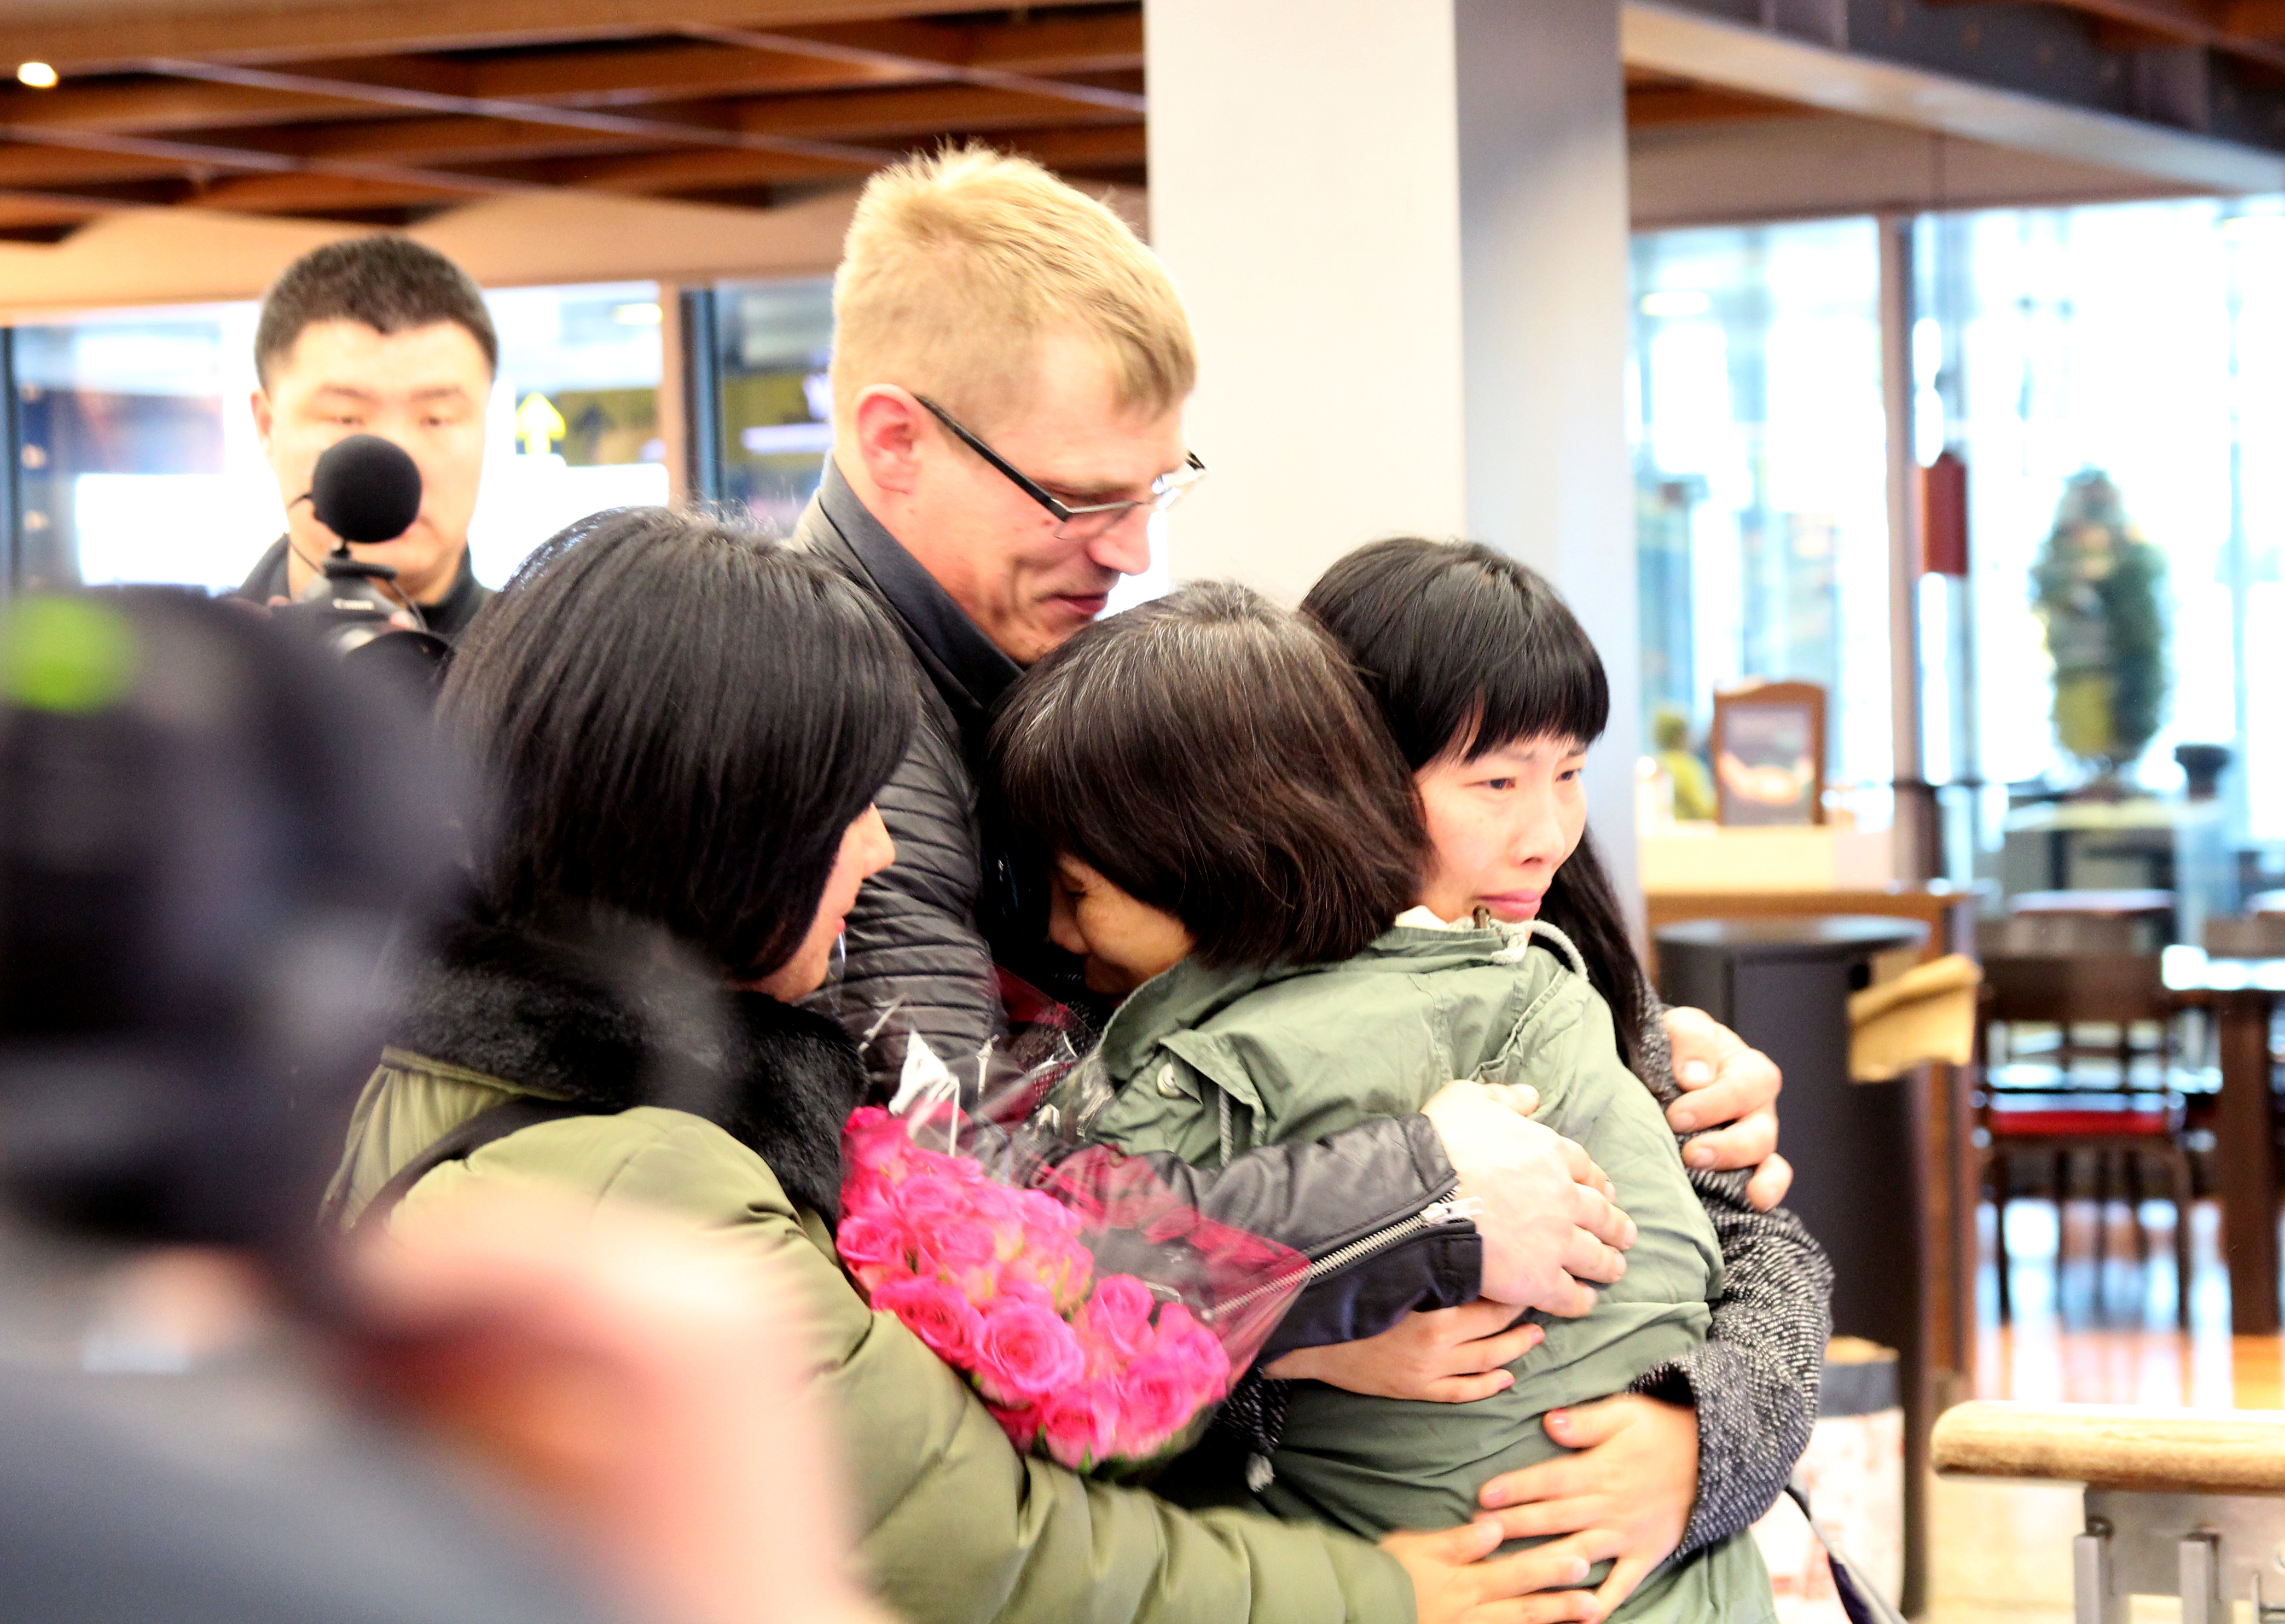 Former Chinese prisoner of conscience Chen Zhenping was greeted by her family and Amnesty International Finland activists upon her arrival to Finland.  Falun Gong practitioner Chen Zhenping was detained in August 2008 and sentenced to eight-years behind bars. While imprisoned, she endured brutal torture and ill-treatment- all because of her religious beliefs.